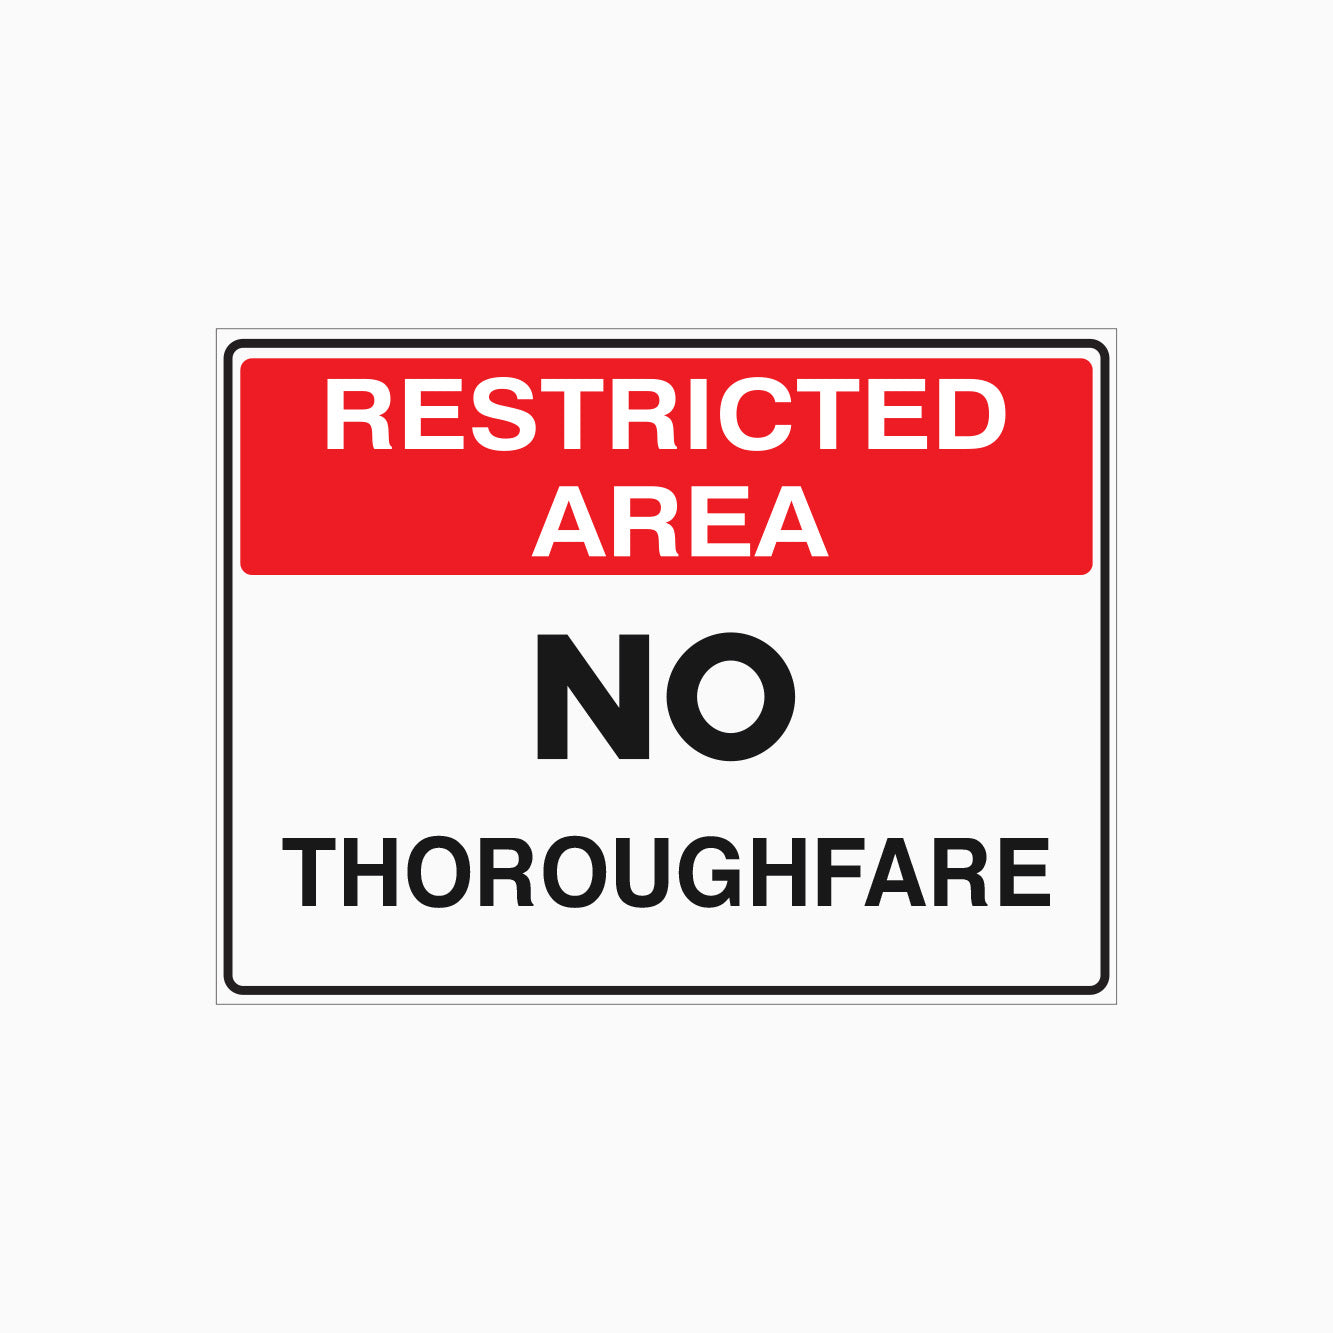 RESTRICTED AREA SIGN - NO THOROUGHFARE SIGN